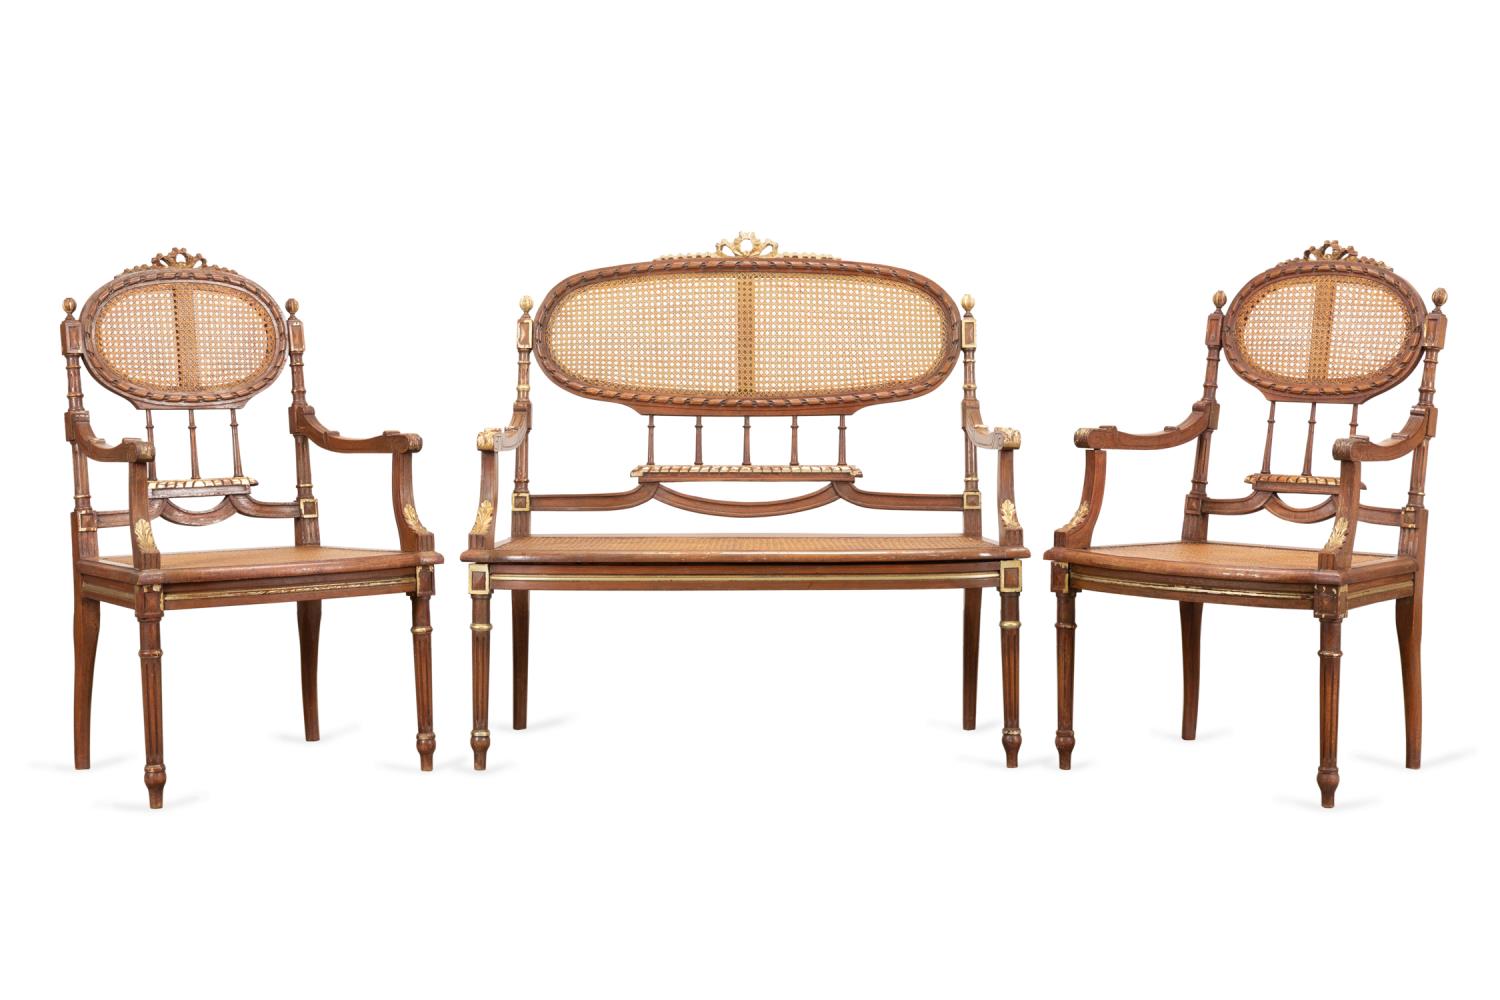 3PCS NEOCLASSICAL STYLE CANED PARLOR